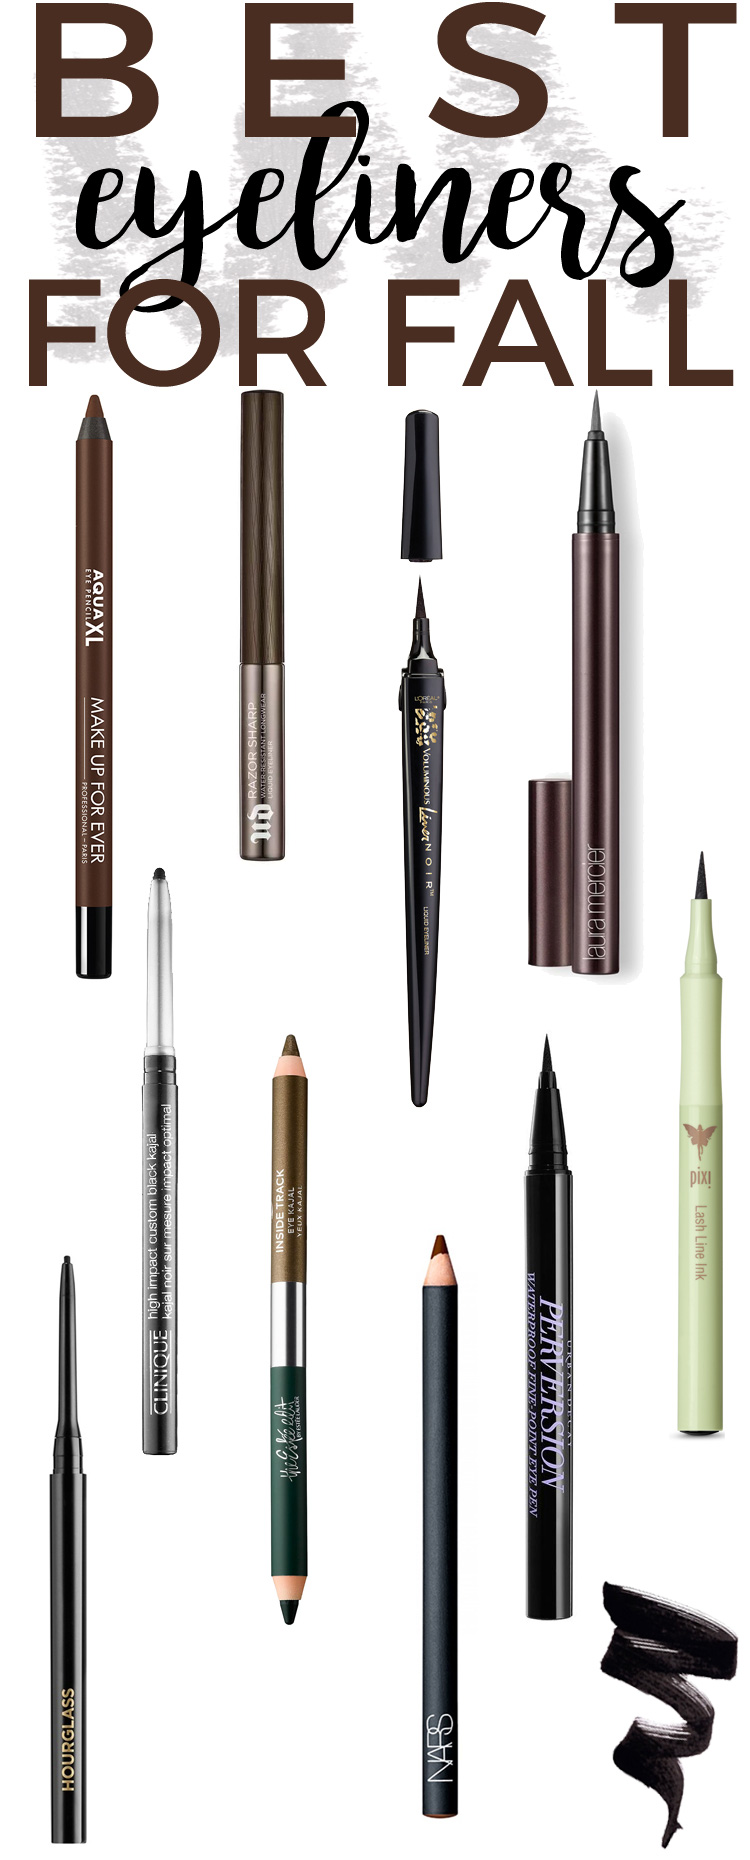 barriere Røg korroderer 10 Best Eyeliners for Fall. — Beautiful Makeup Search